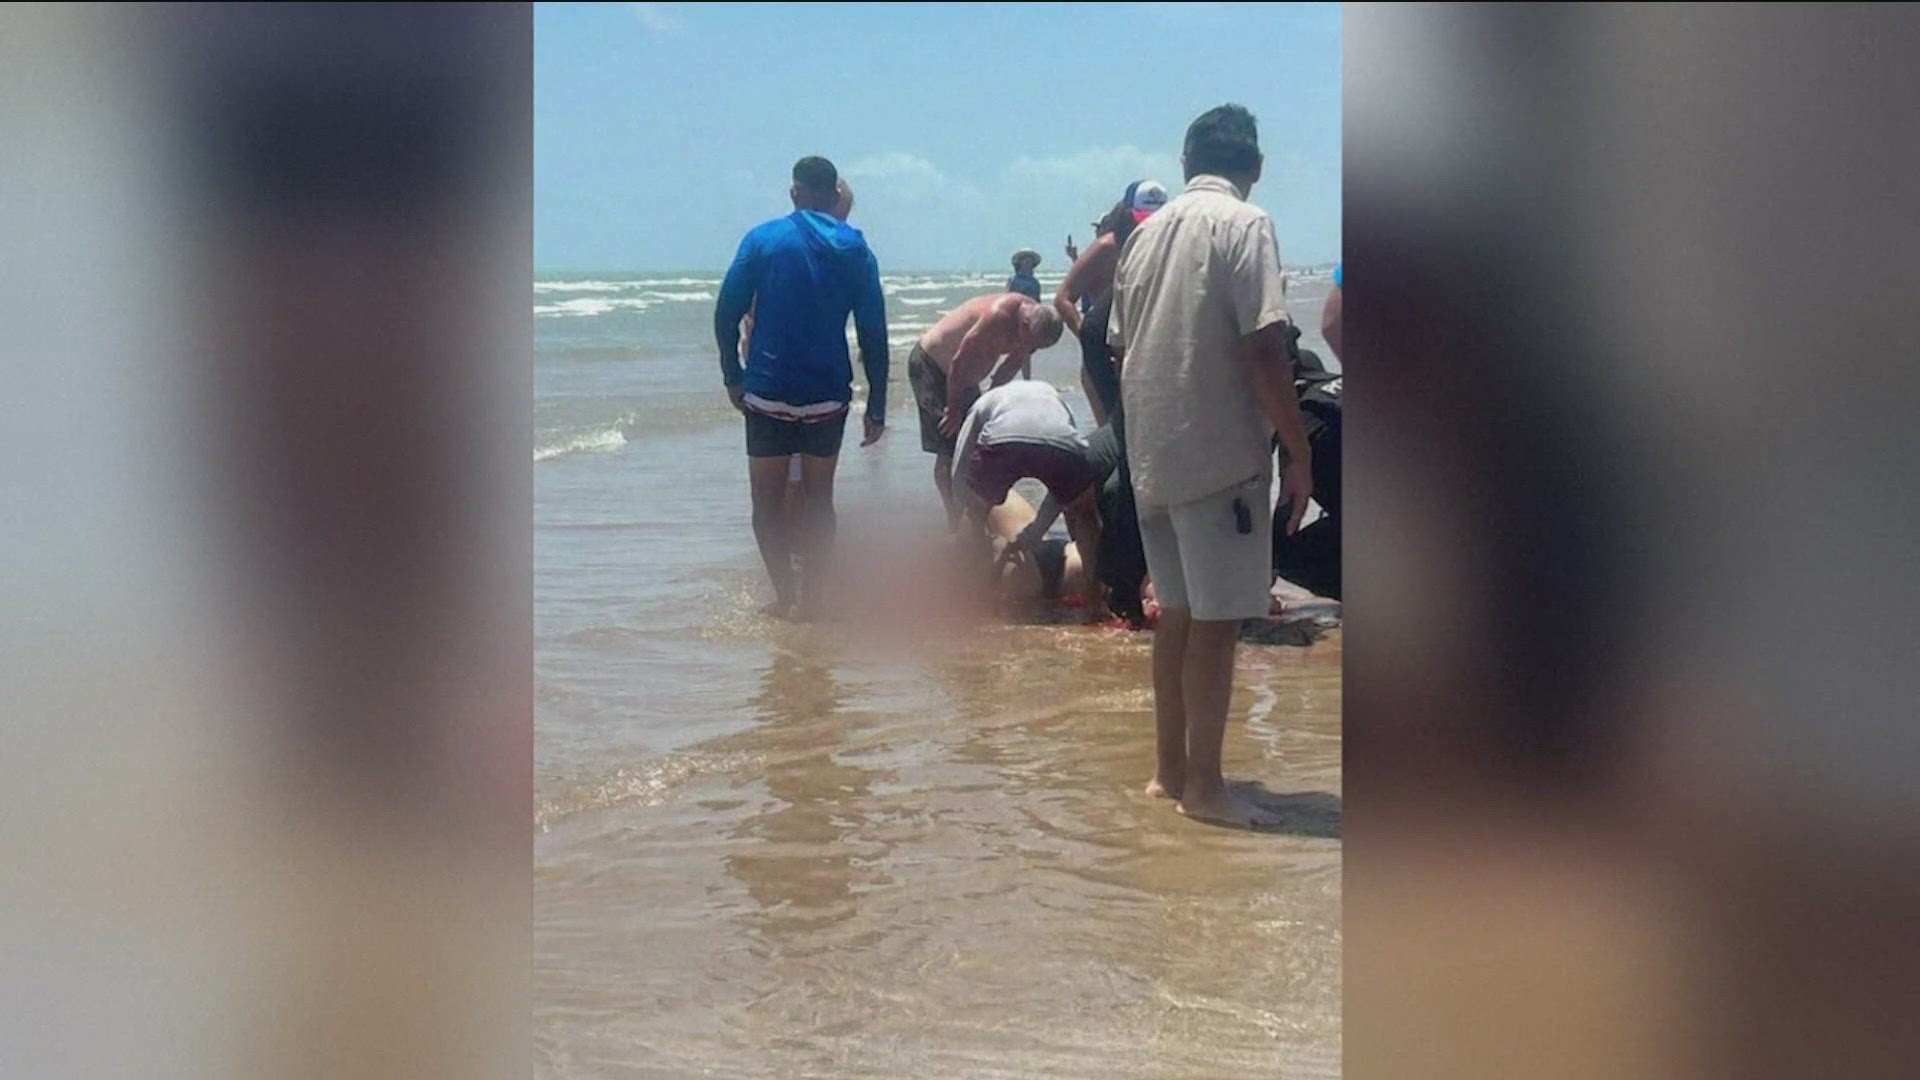 Two people were bitten and two others had close calls with the shark on the Fourth of July.